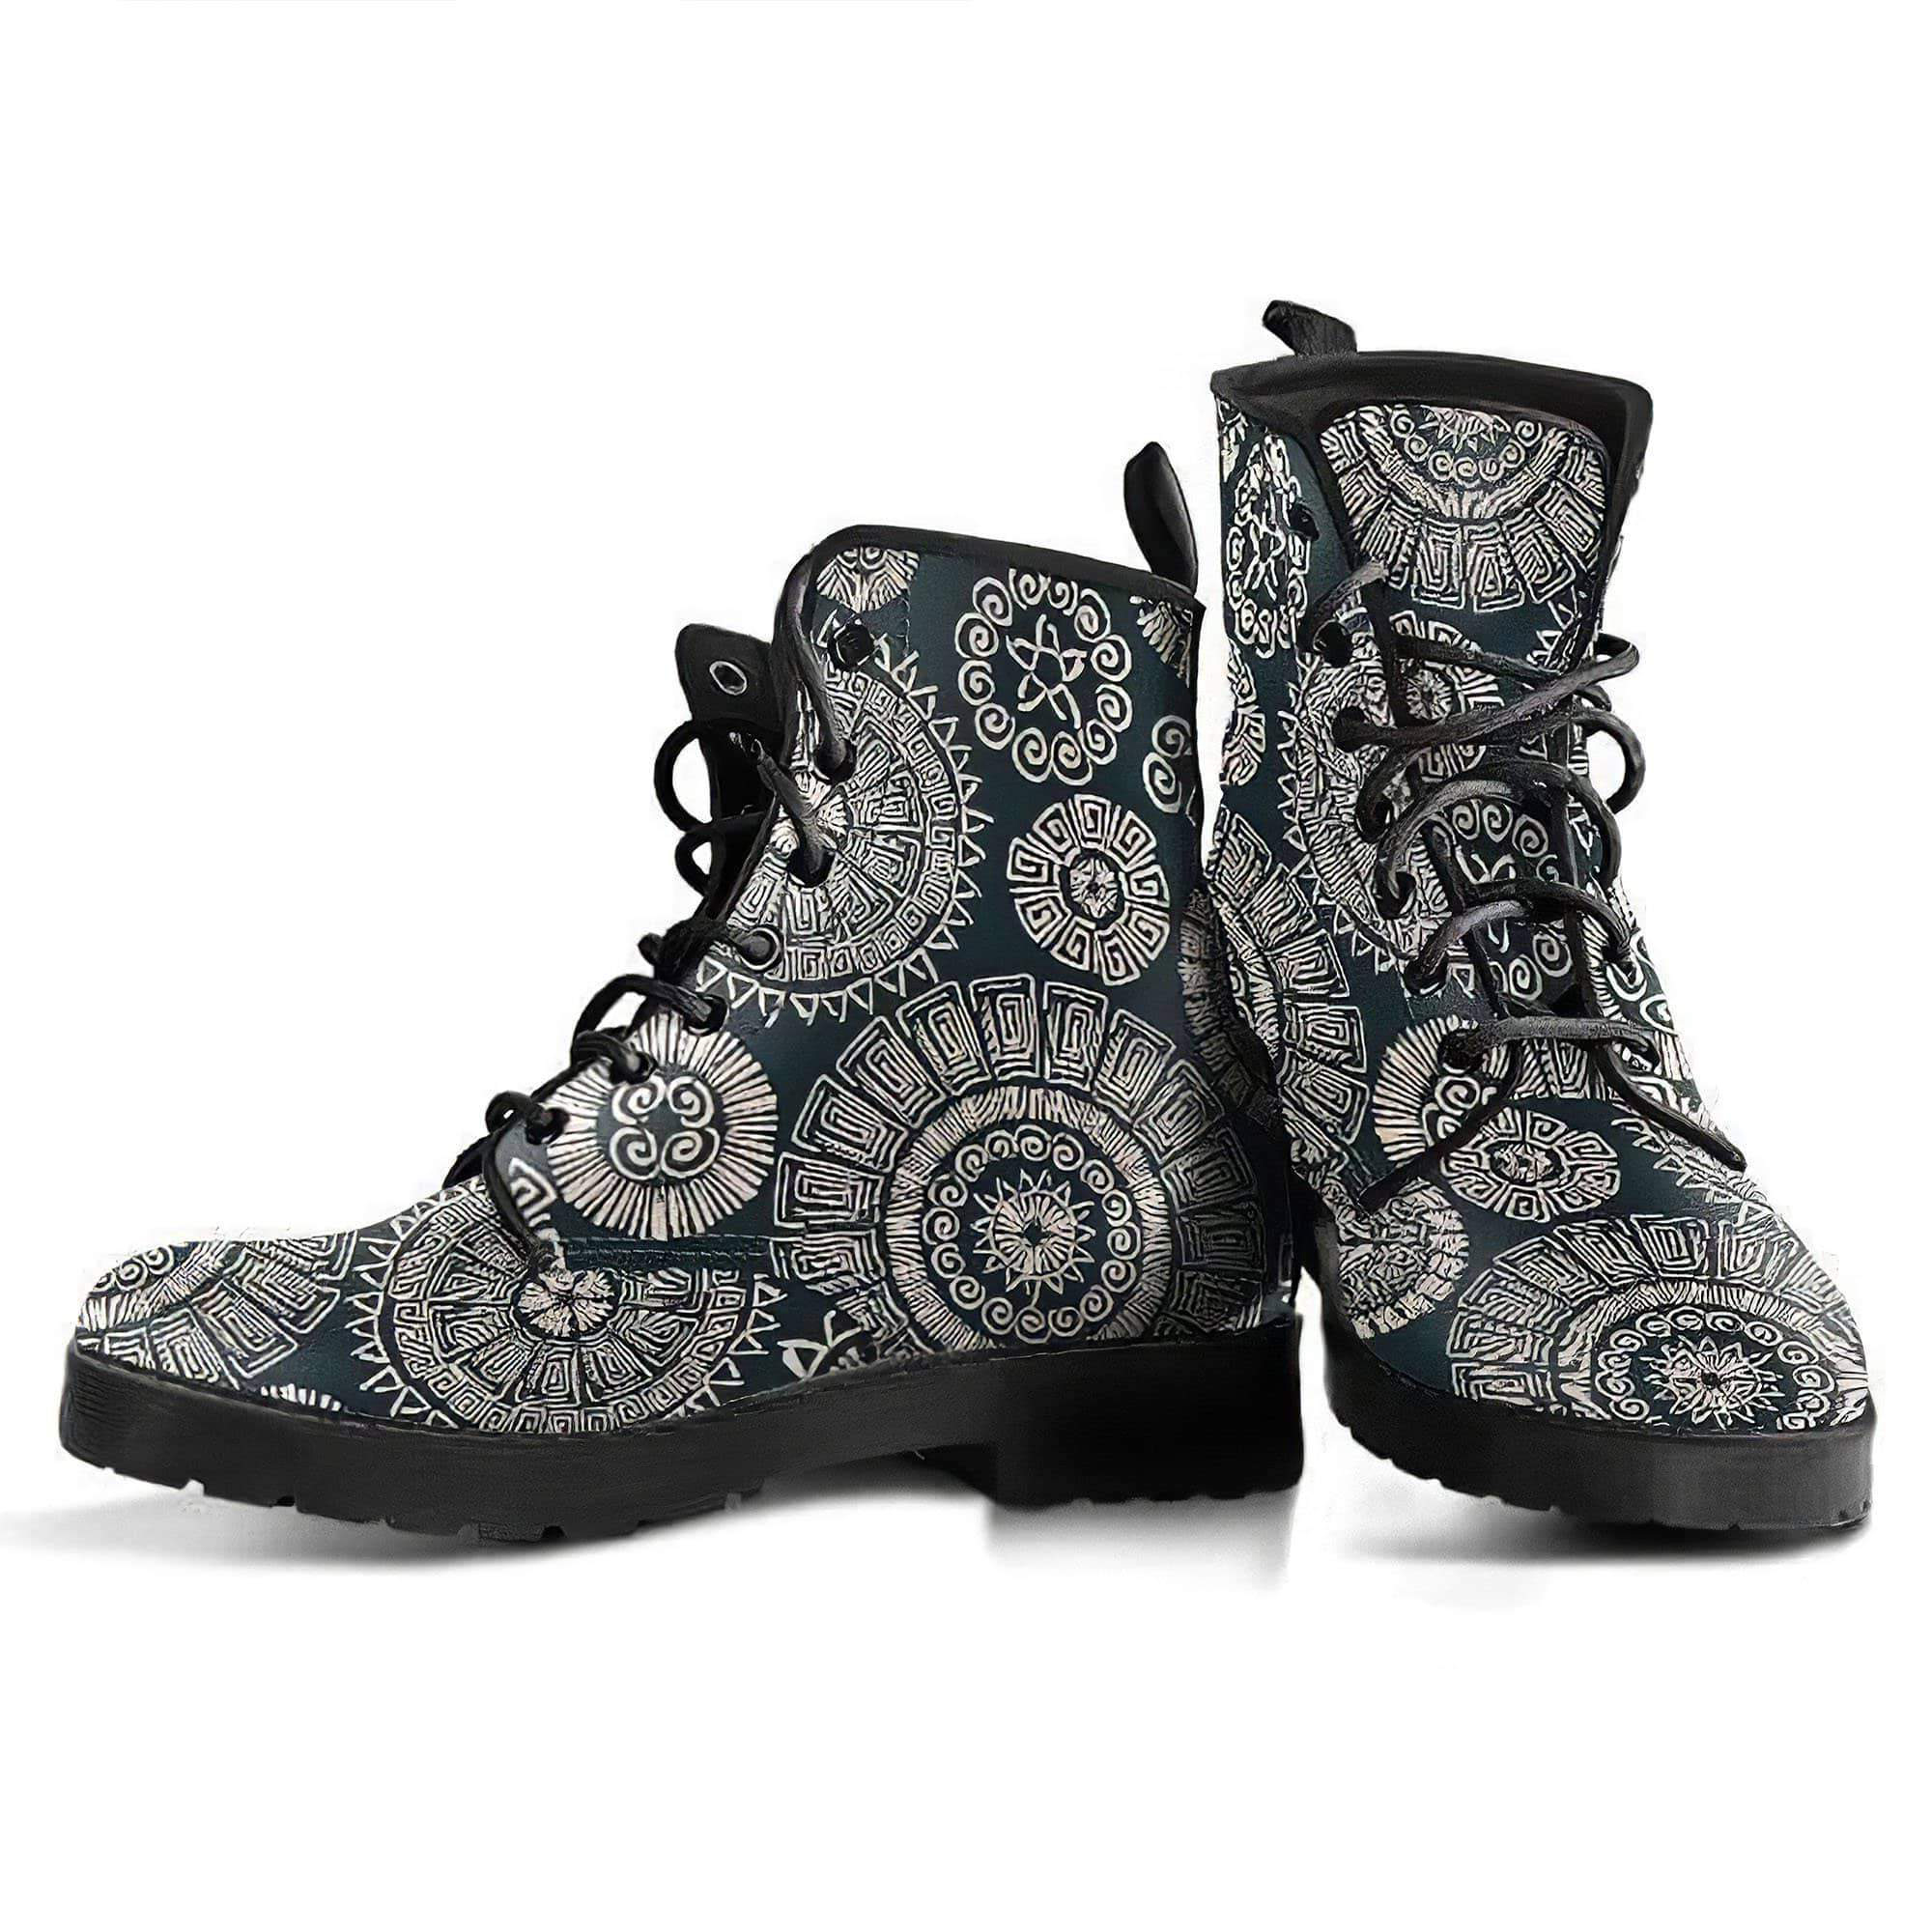 tribal-mandala-handcrafted-boots-women-s-leather-boots-12051969441853.jpg